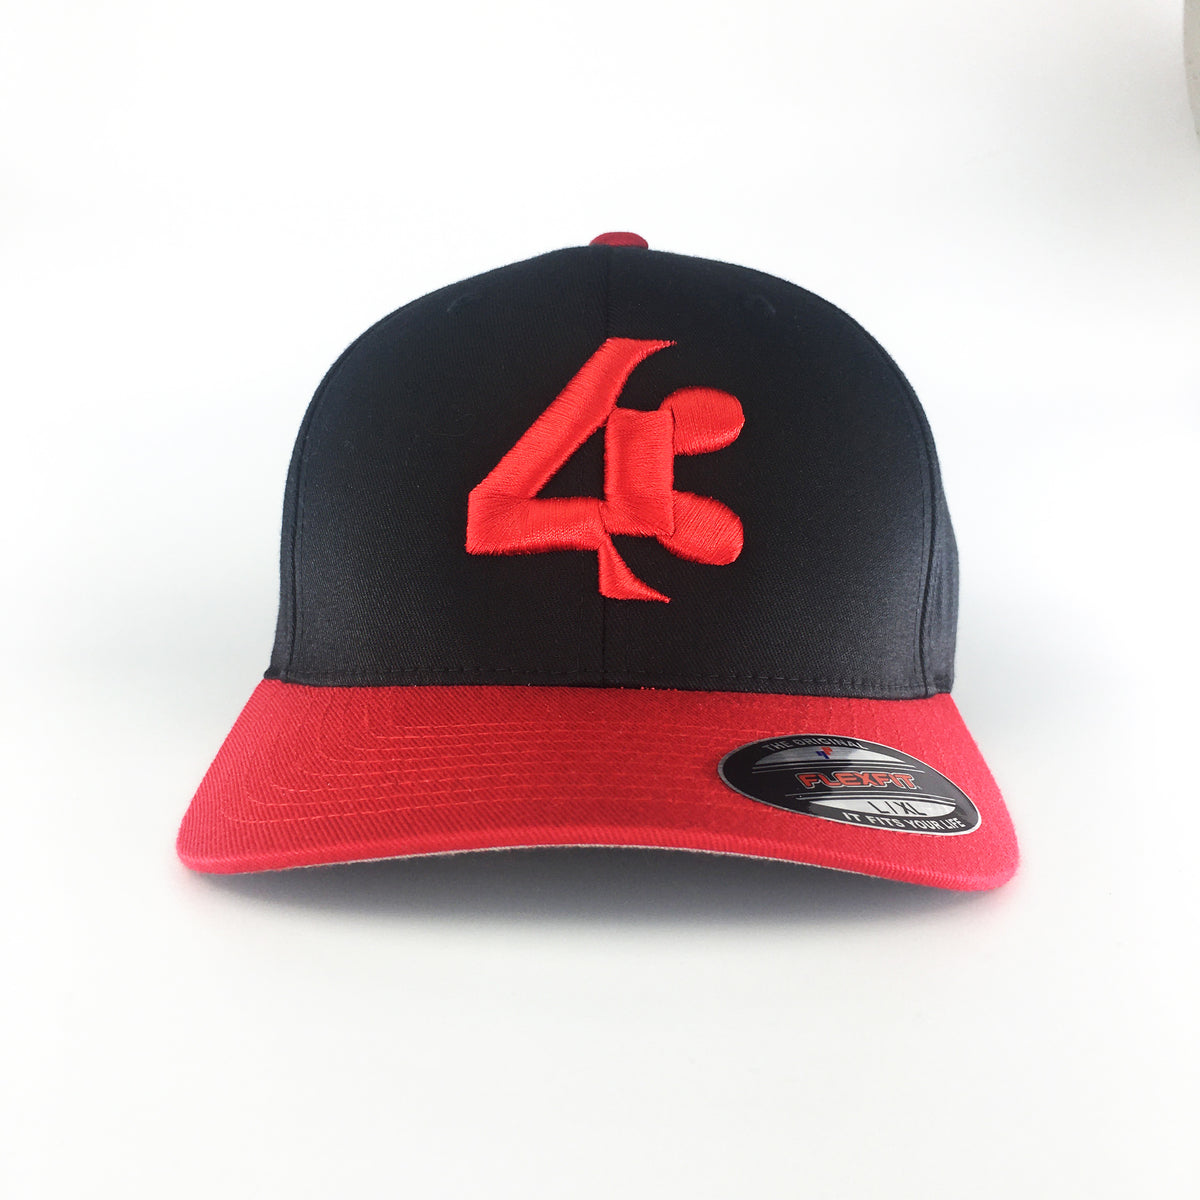 43 Red and Black two FortyThree™ – Flexfit Fitted toned USA